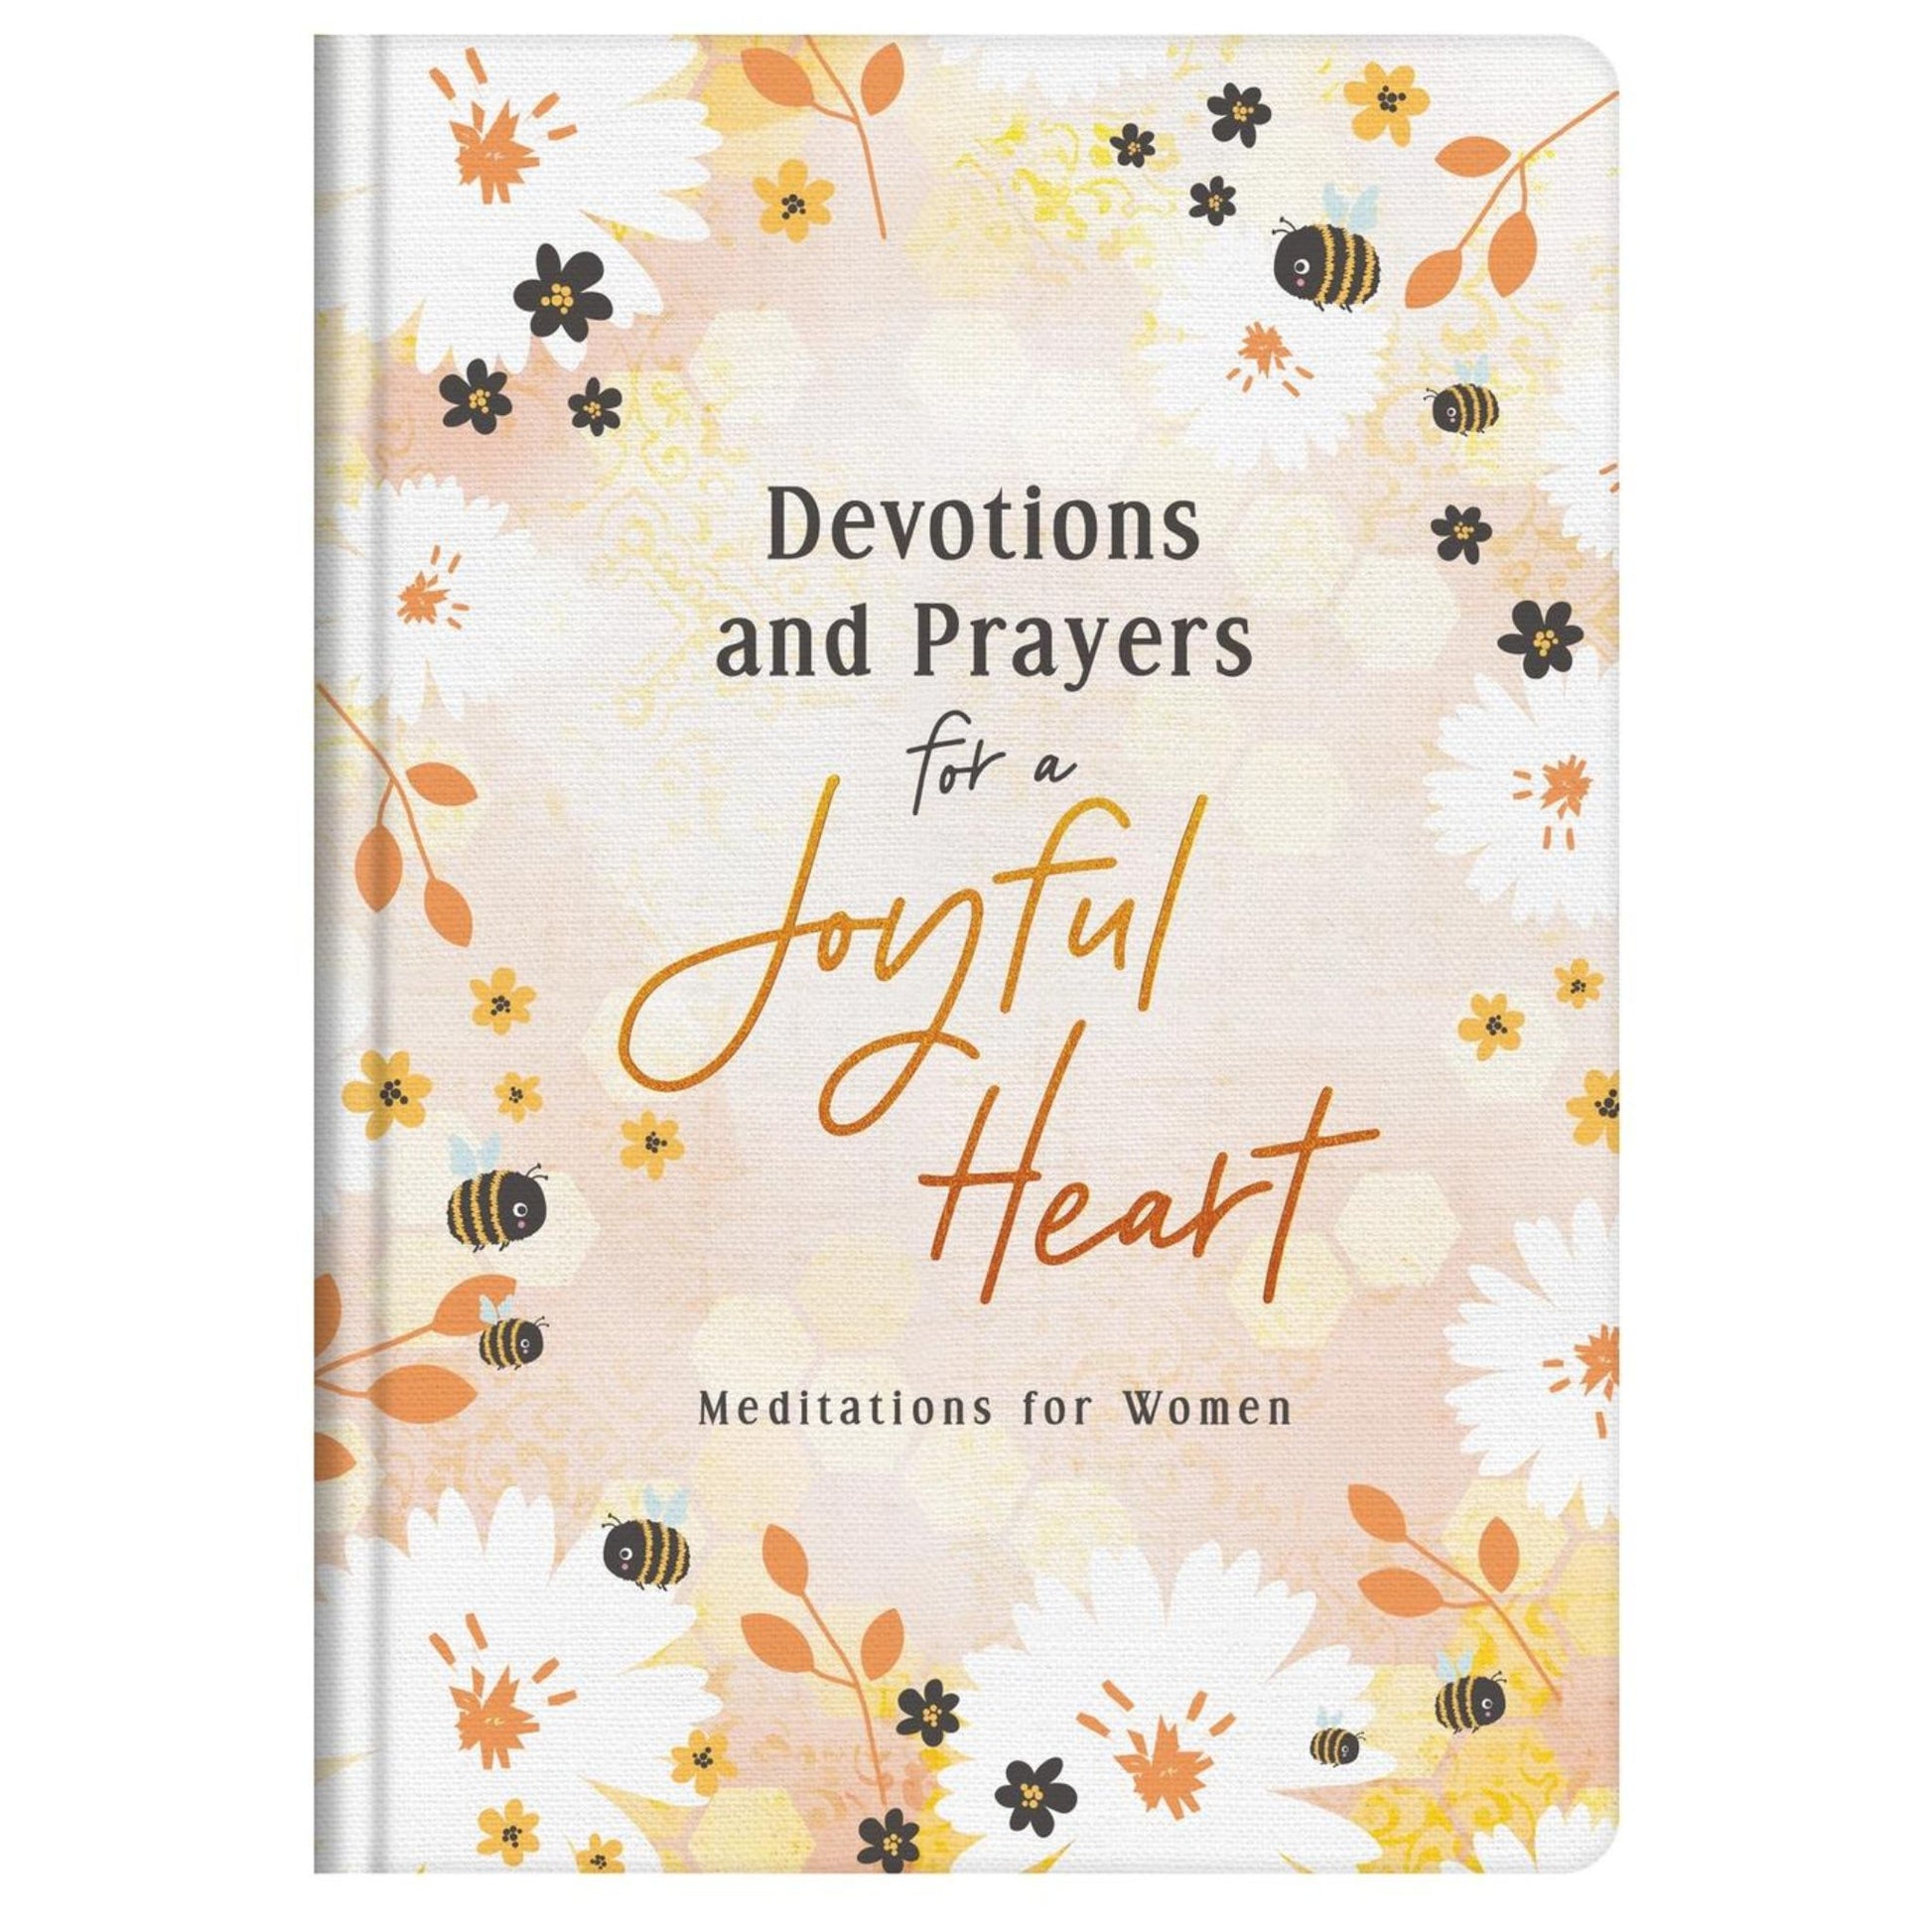 Devotions and Prayers For A Joyful Heart book cover